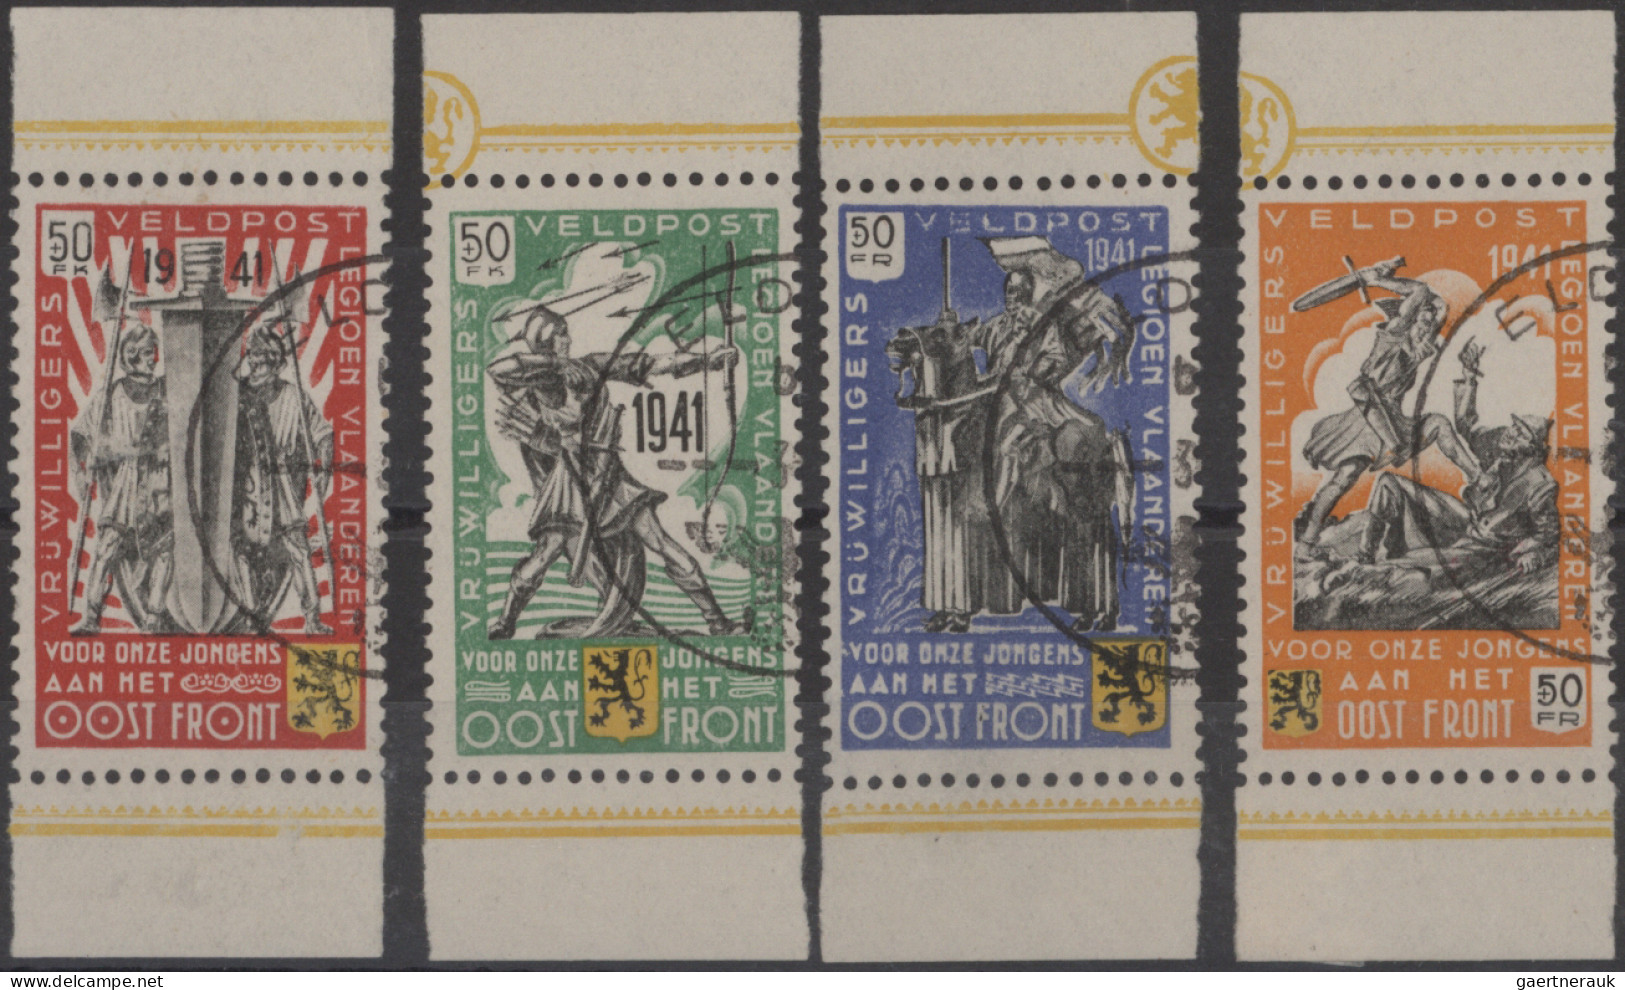 Belgium: 1940/1944 "WWII issues": Specialized collection of both mint and used s